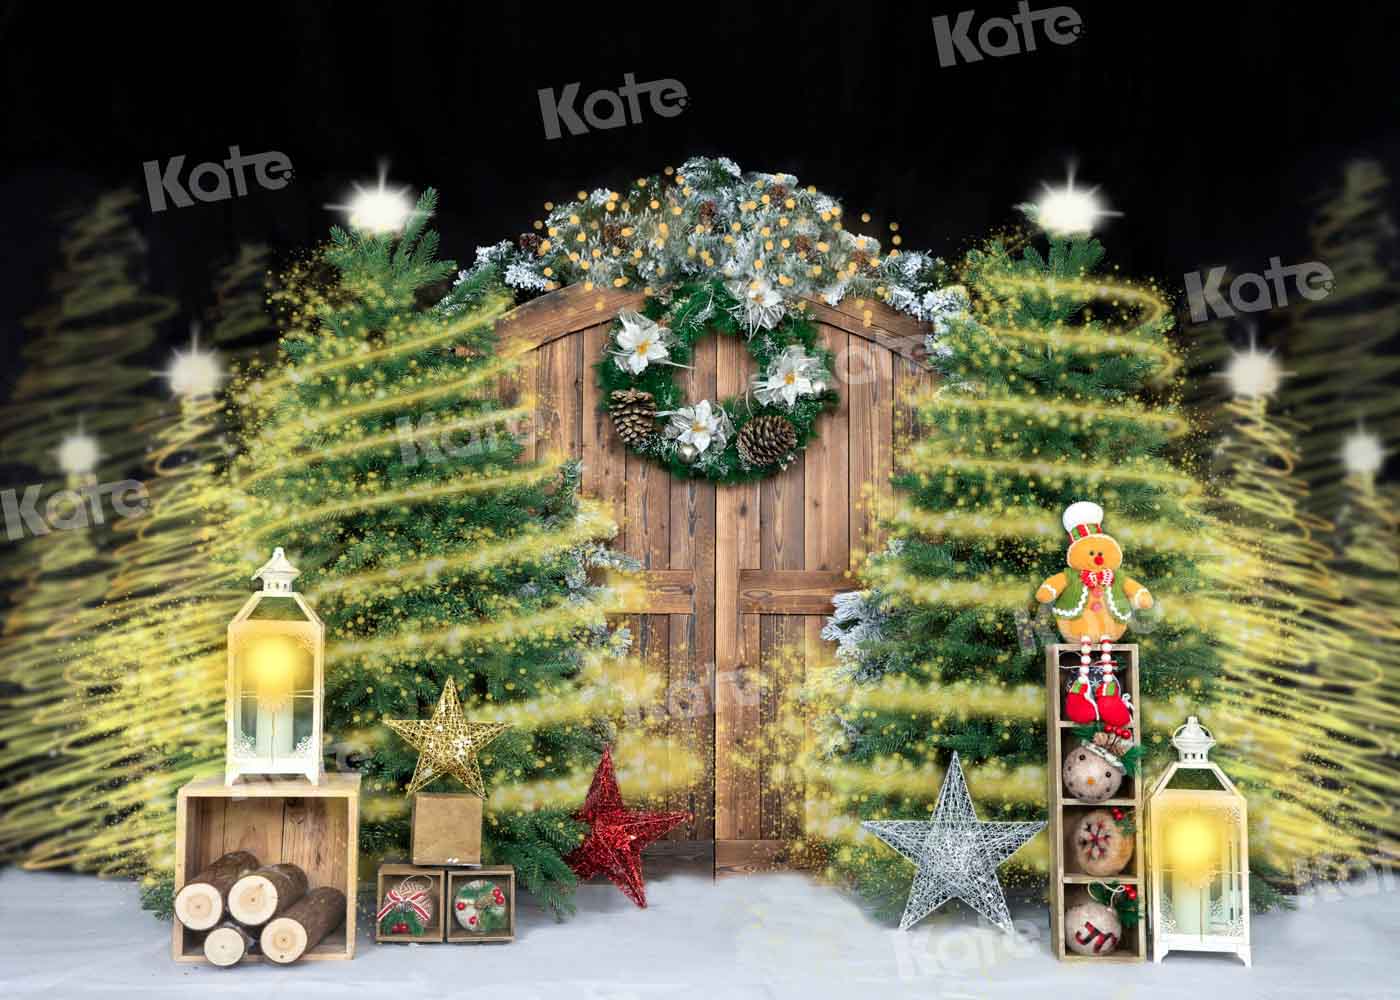 Kate Gorgeous Christmas Barn Door Shiny Backdrop Designed by Emetselch